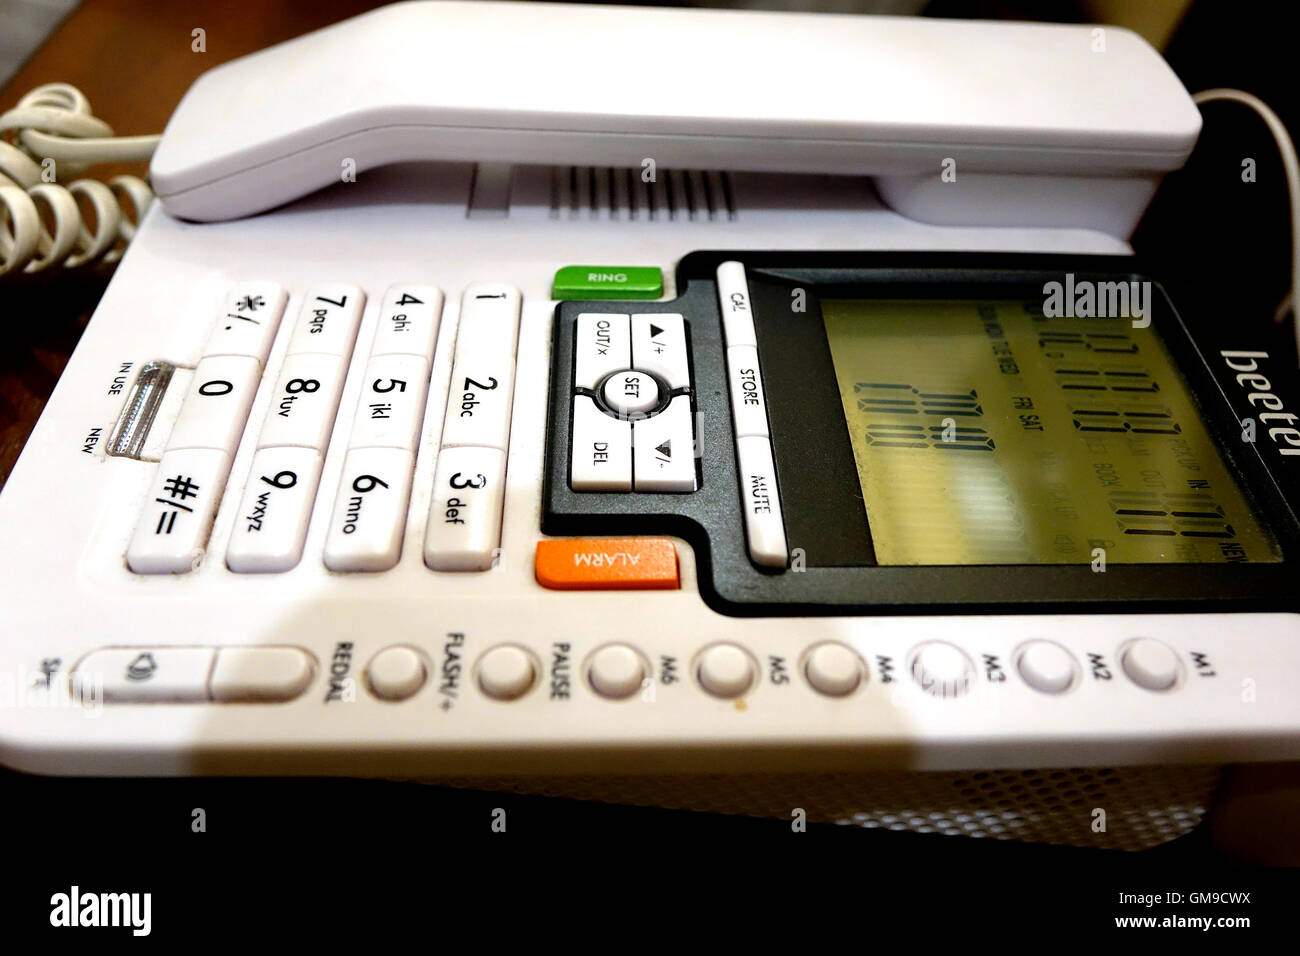 Telephone devices at office desk Stock Photo